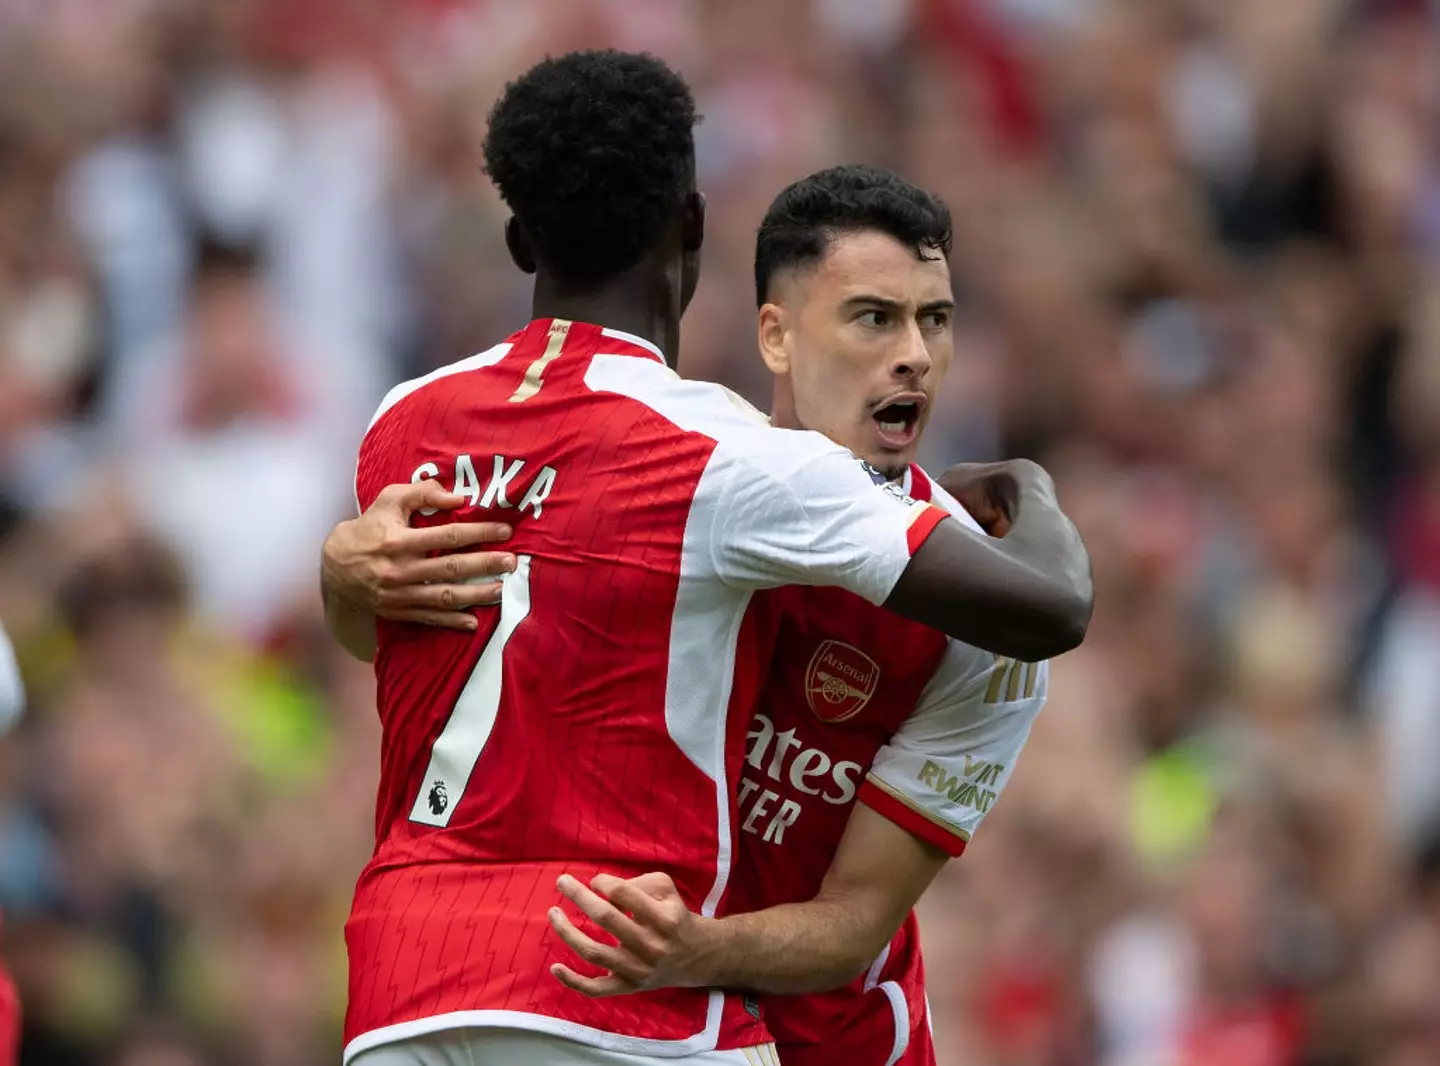 Saka and Martinelli are key players for Arsenal (Image: Getty)